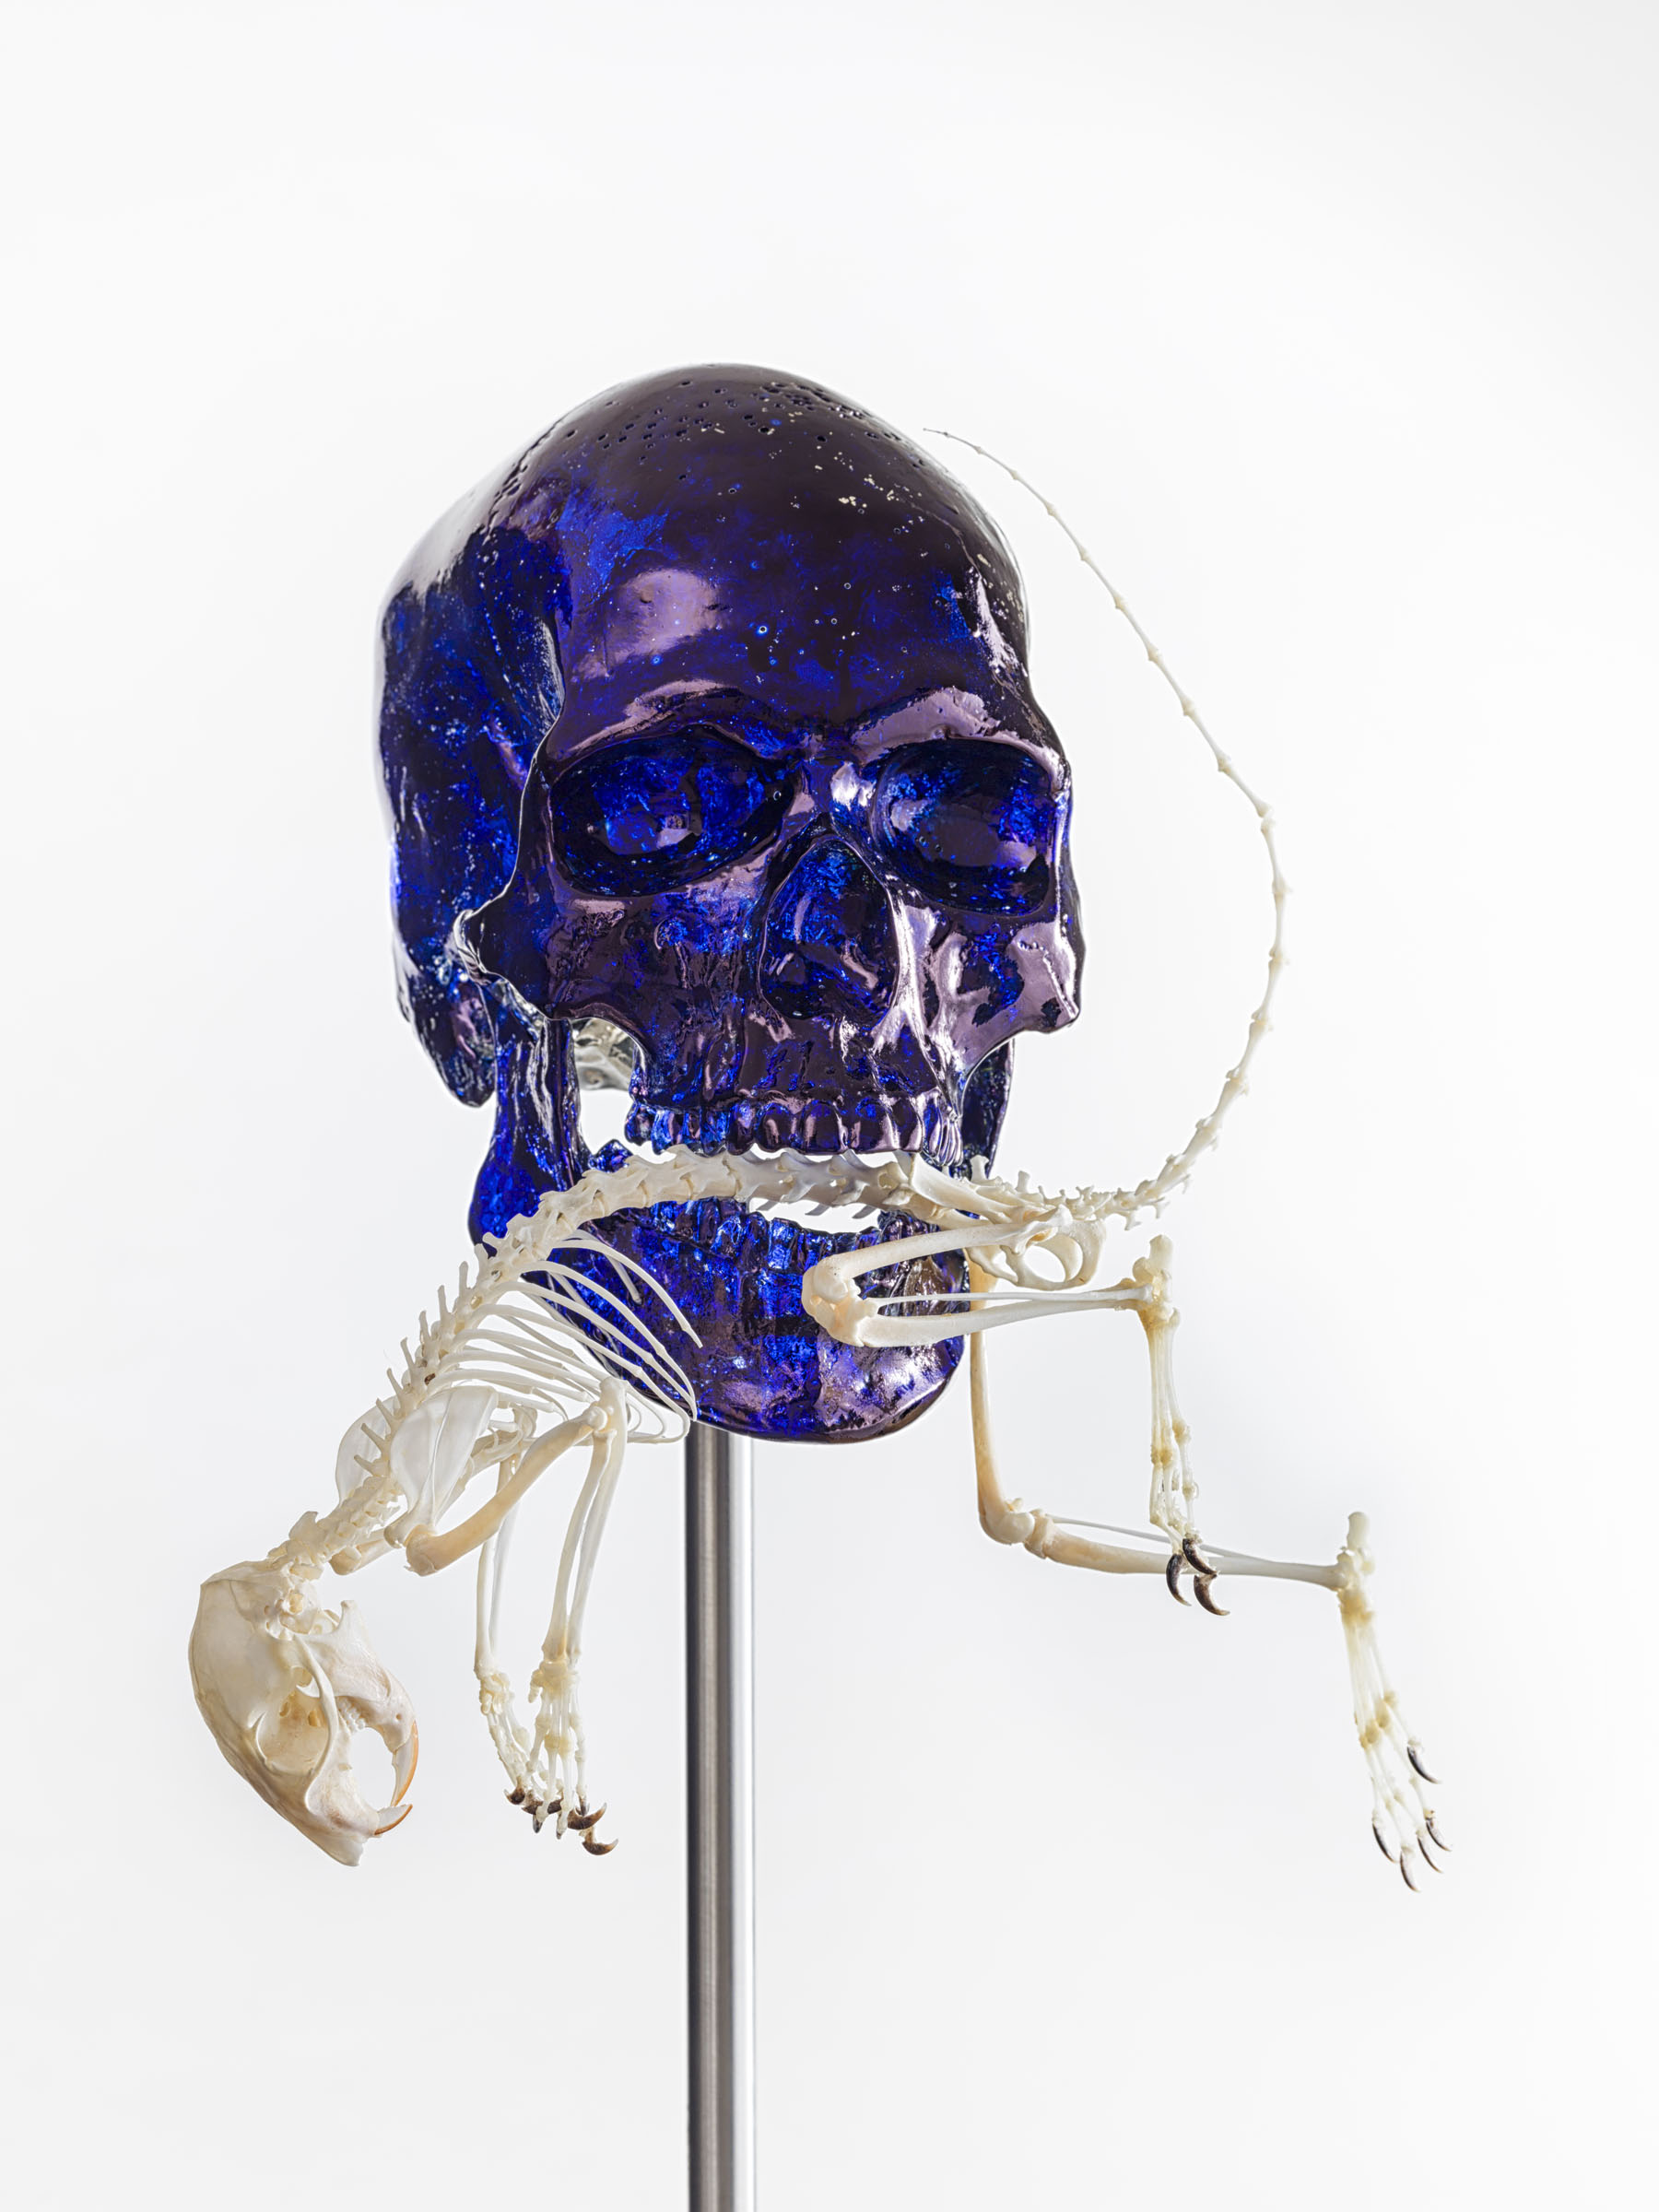 Jan Fabre, Skull with squirrel, 2017